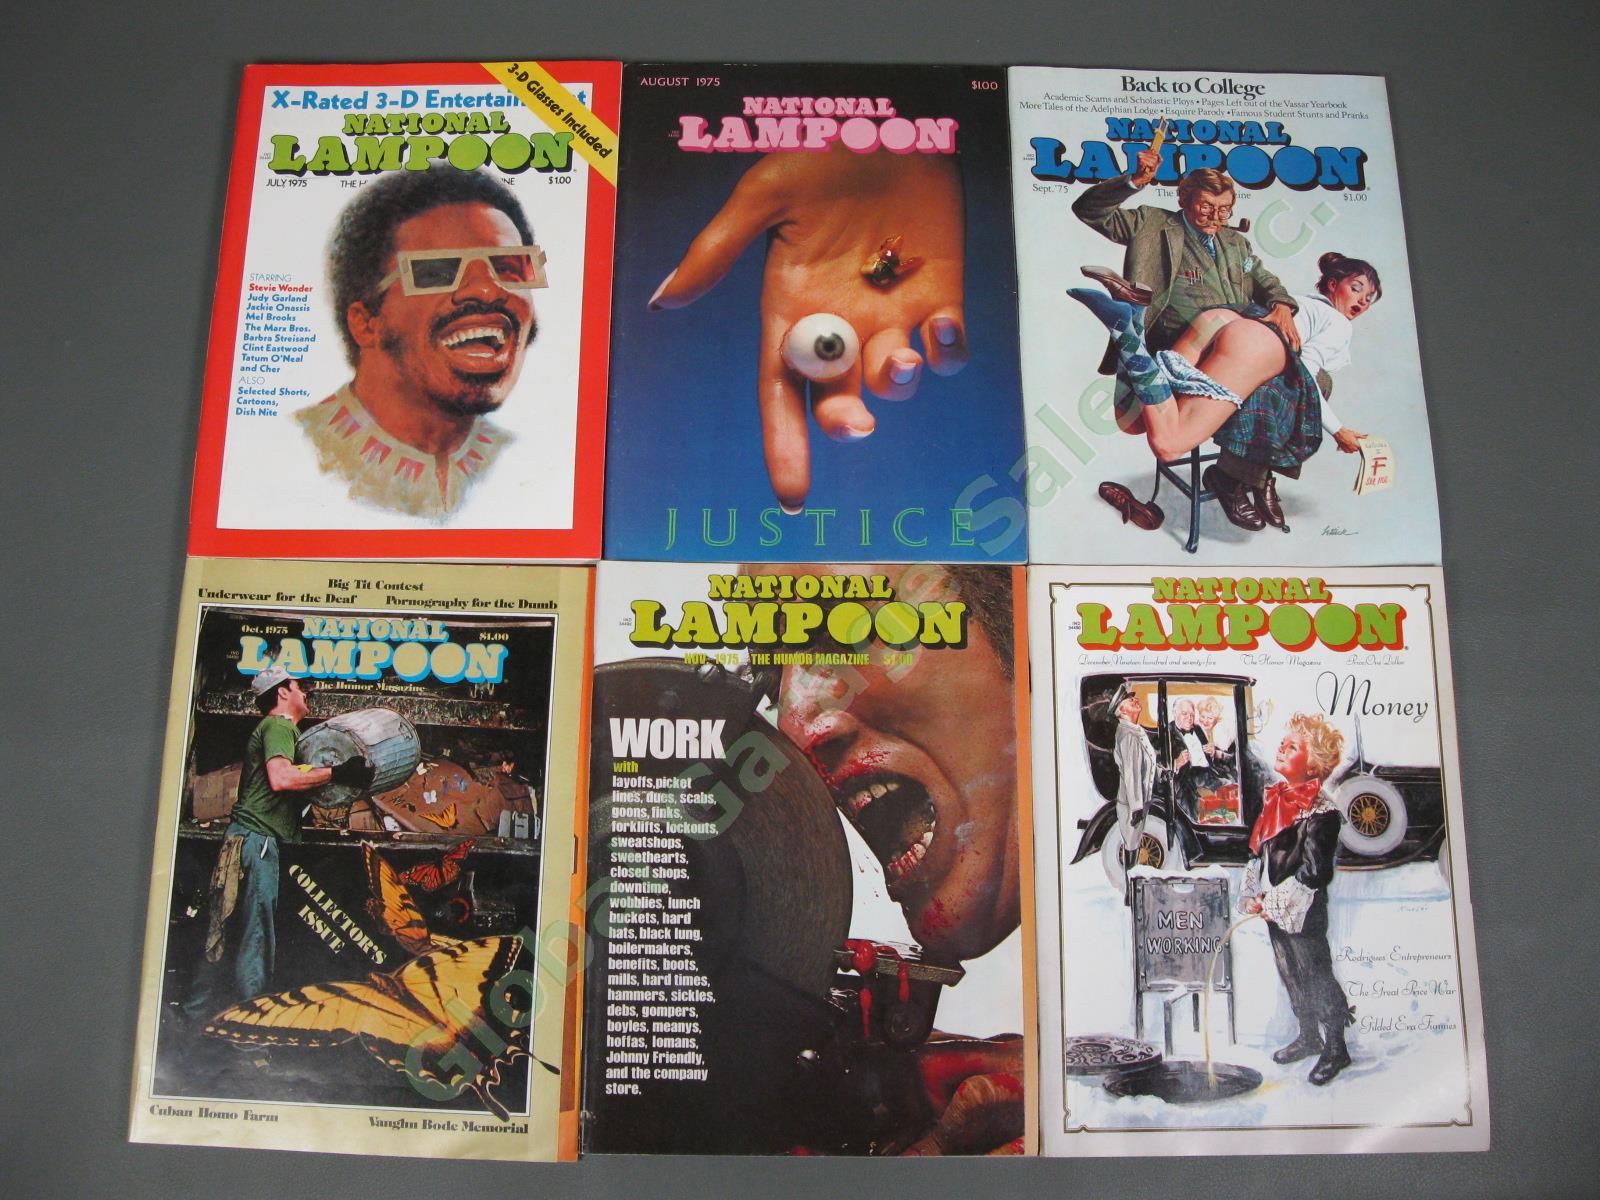 COMPLETE Vtg 1975 National Lampoon Humor Magazine 12 Issue Set Back To College 2